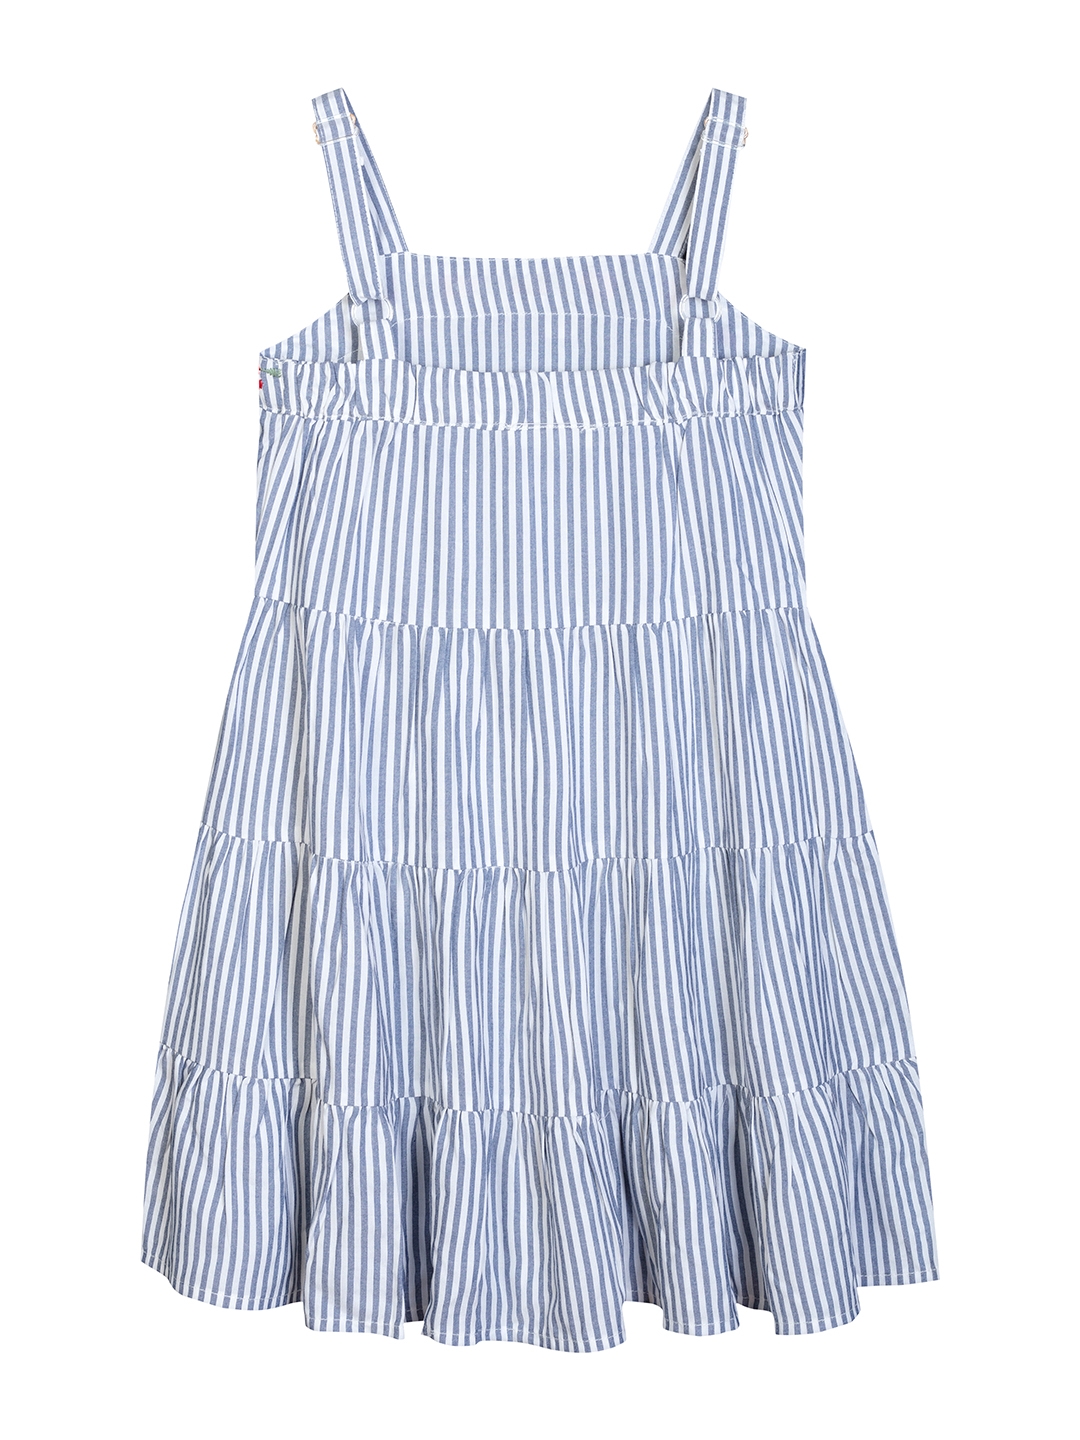 Budding Bees | Budding Bees Girls Blue Striped Embroidered A-Line Dress 1